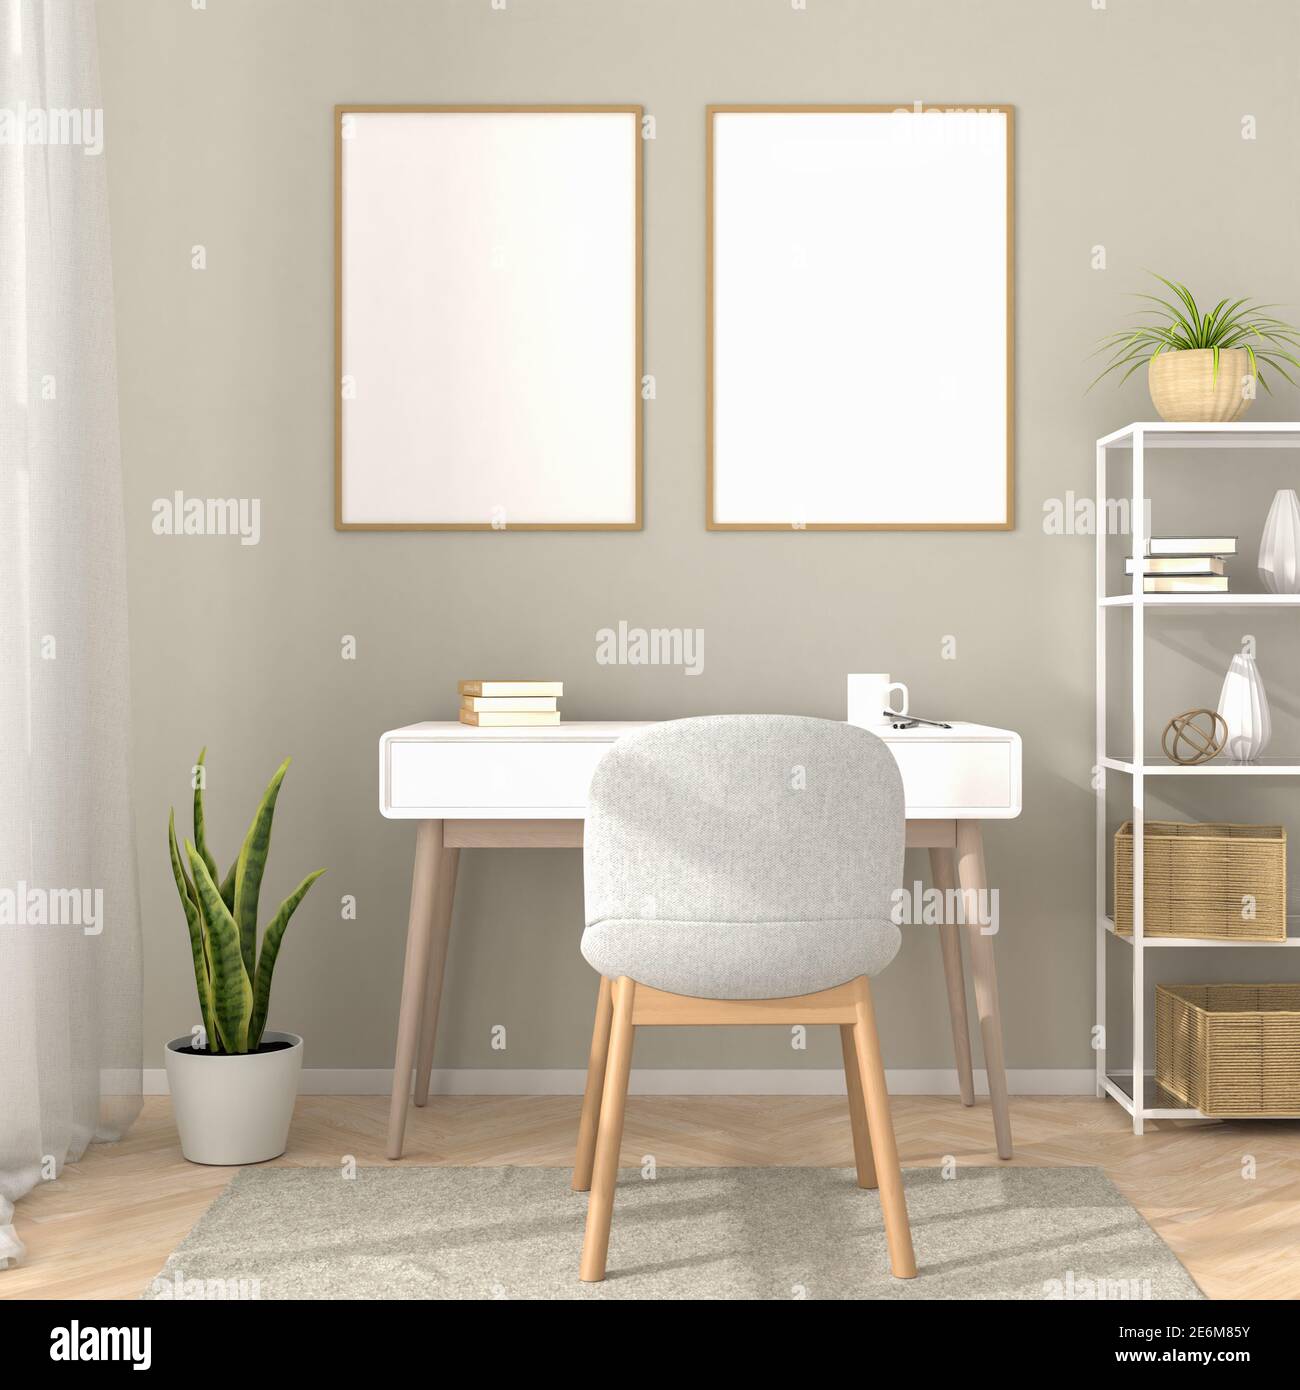 Picture frame mockup with a desk, chair, shelf, carpet, curtain. 3d render Stock Photo